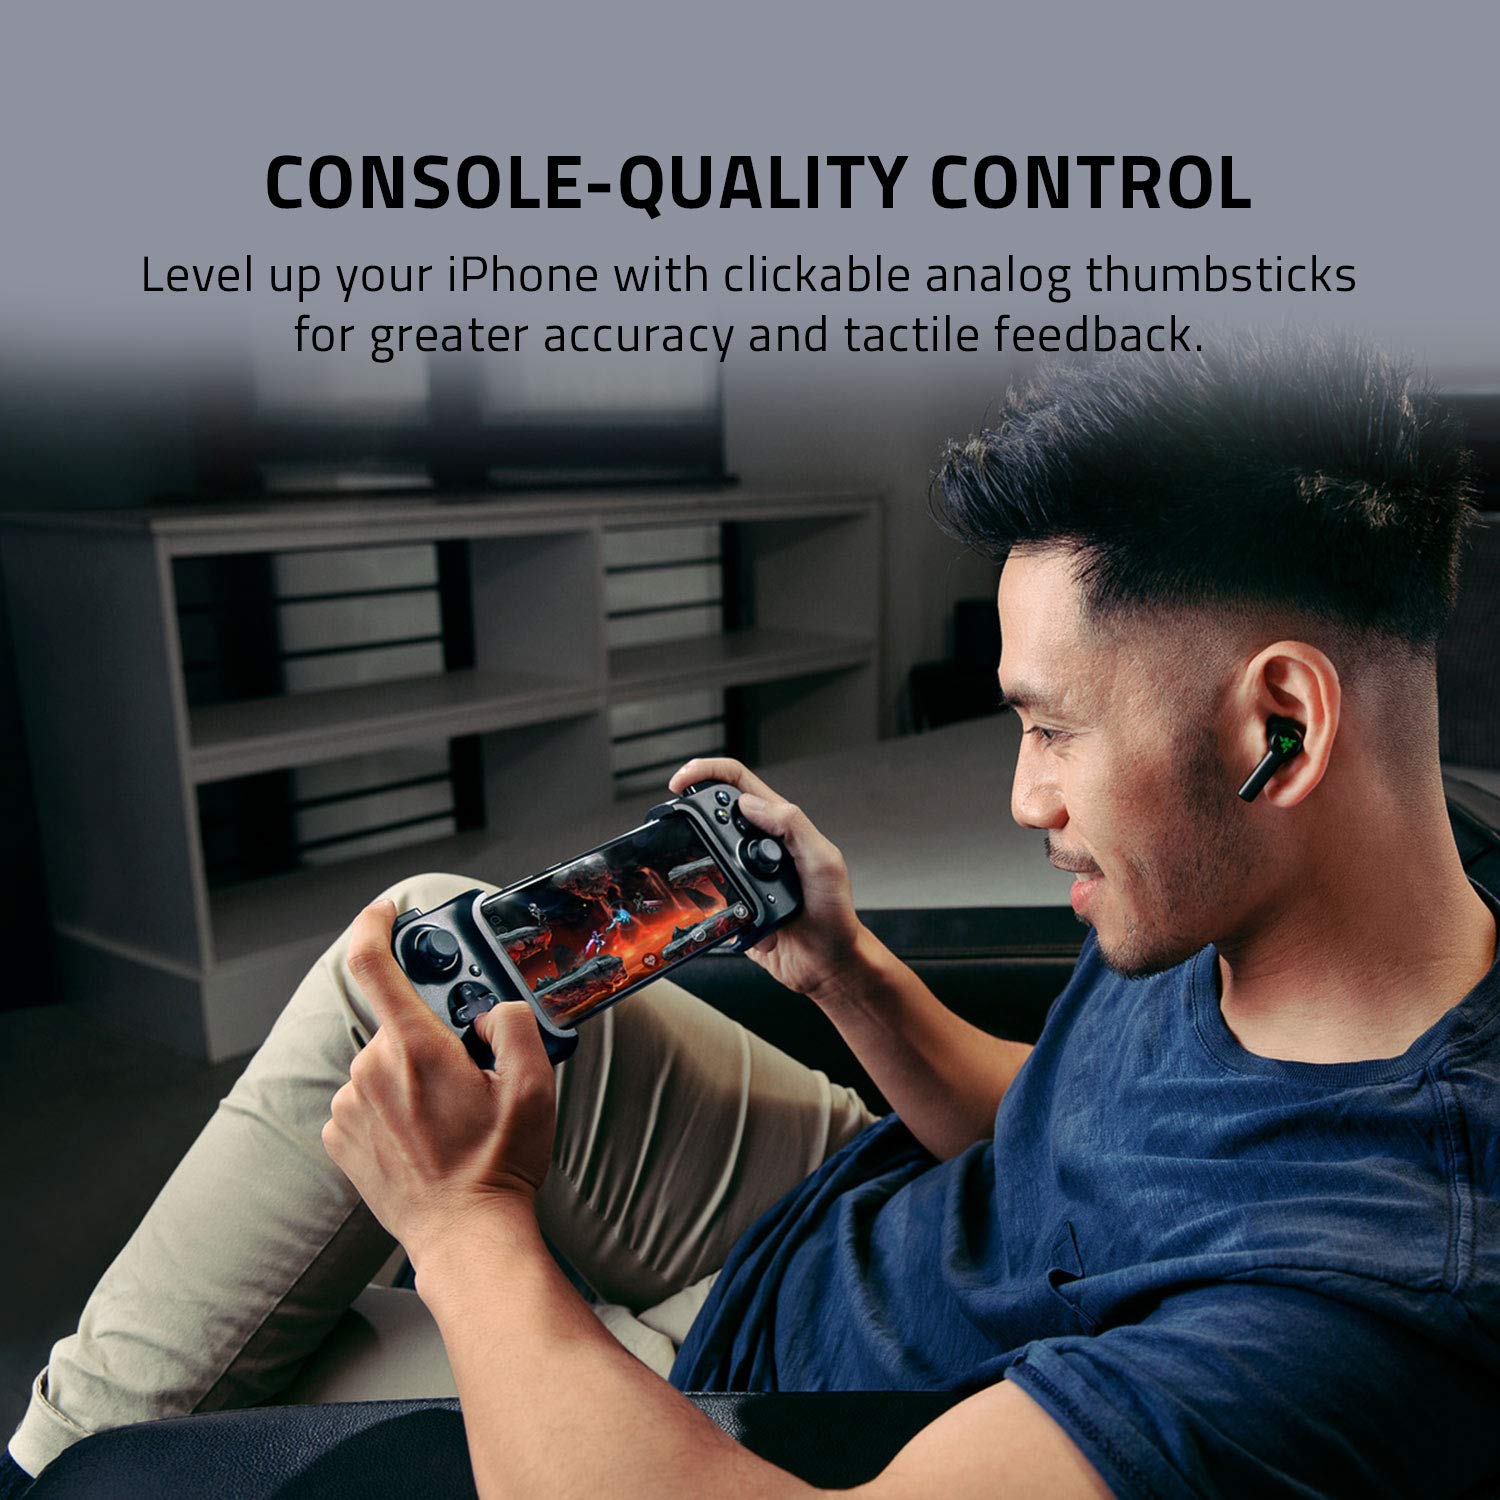 Razer Kishi Mobile Game Controller / Gamepad for iPhone iOS: Works with most iPhones – iPhone X, 11, 12 - Apple Arcade, Amazon Luna, Google Stadia - Lightning Port Passthrough - MFi Certified